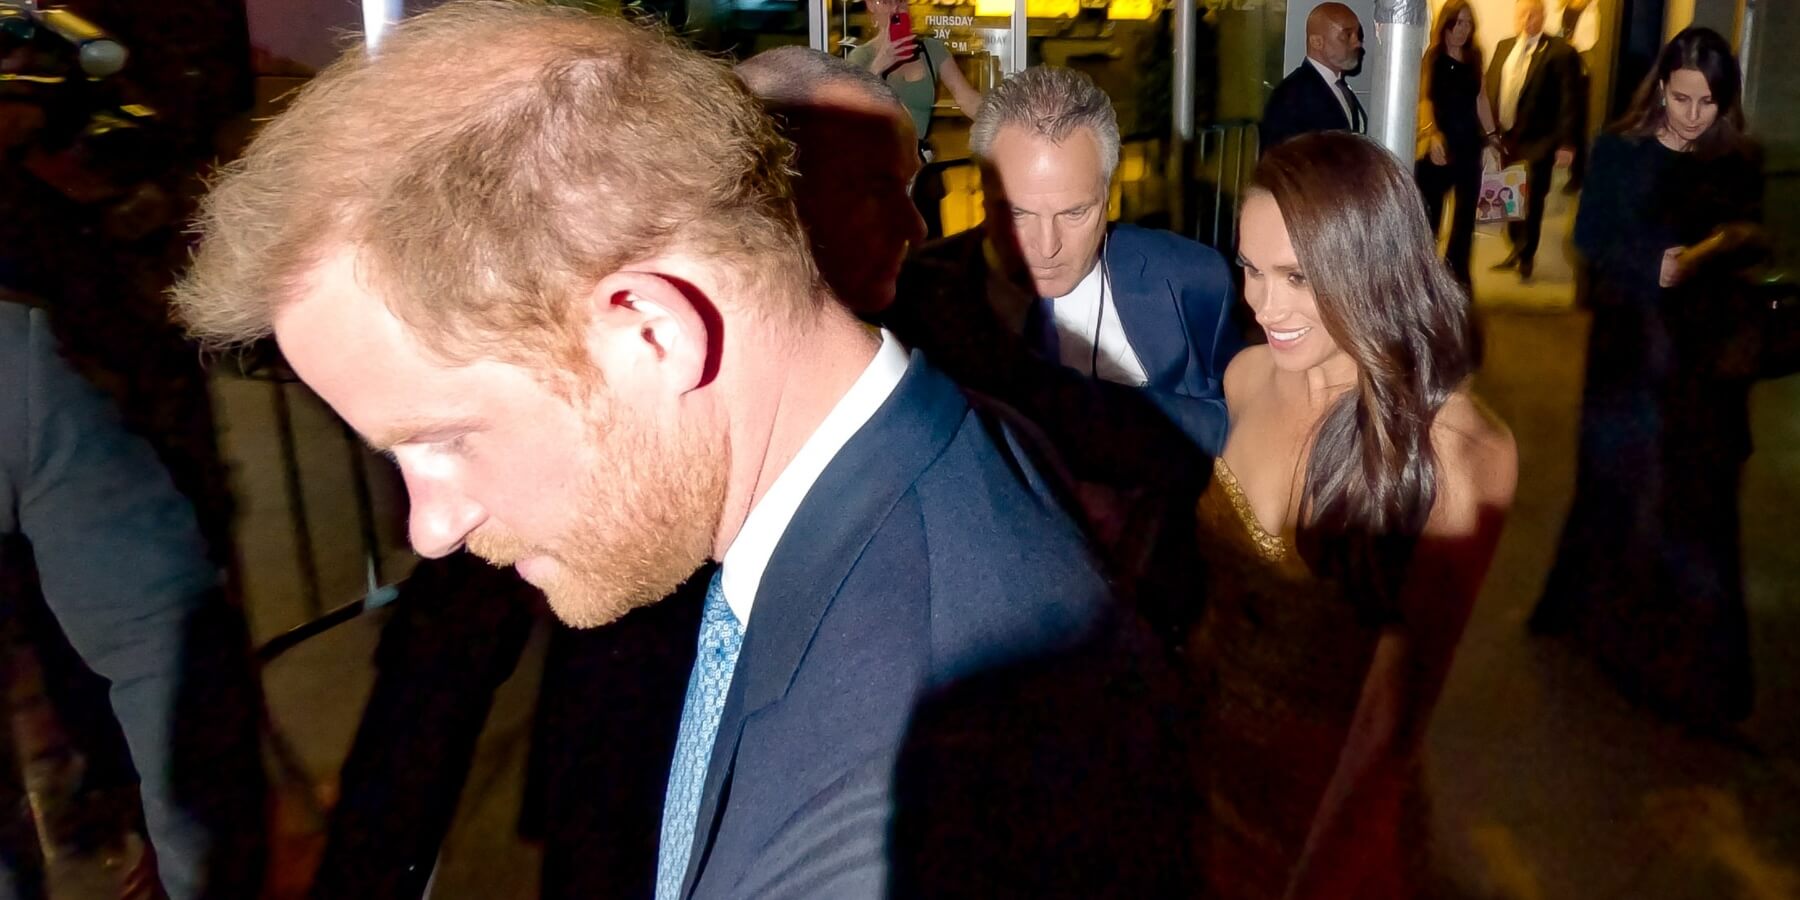 Prince Harry and Meghan Markle surrounded by paparazzi in New York City